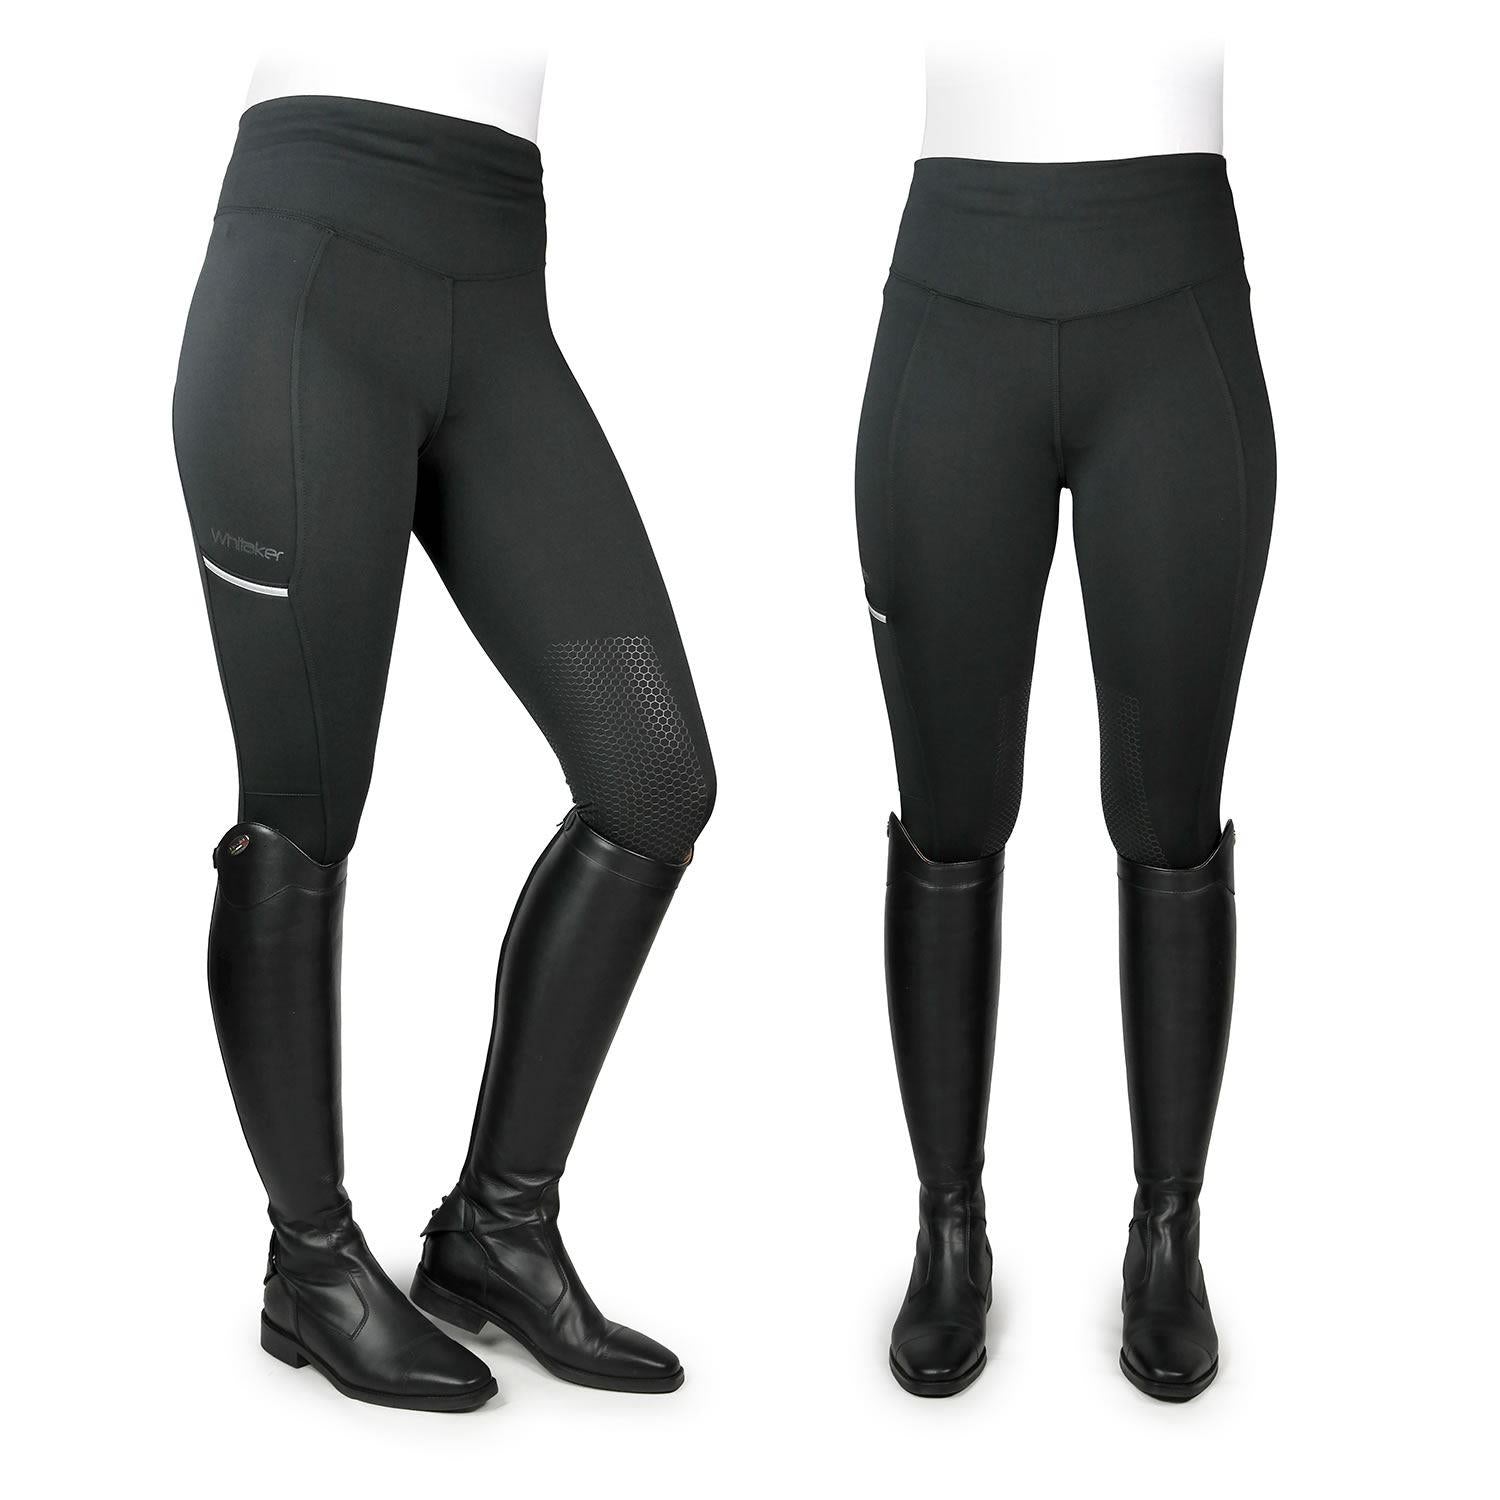 Whitaker Pellon Riding Tights - Just Horse Riders